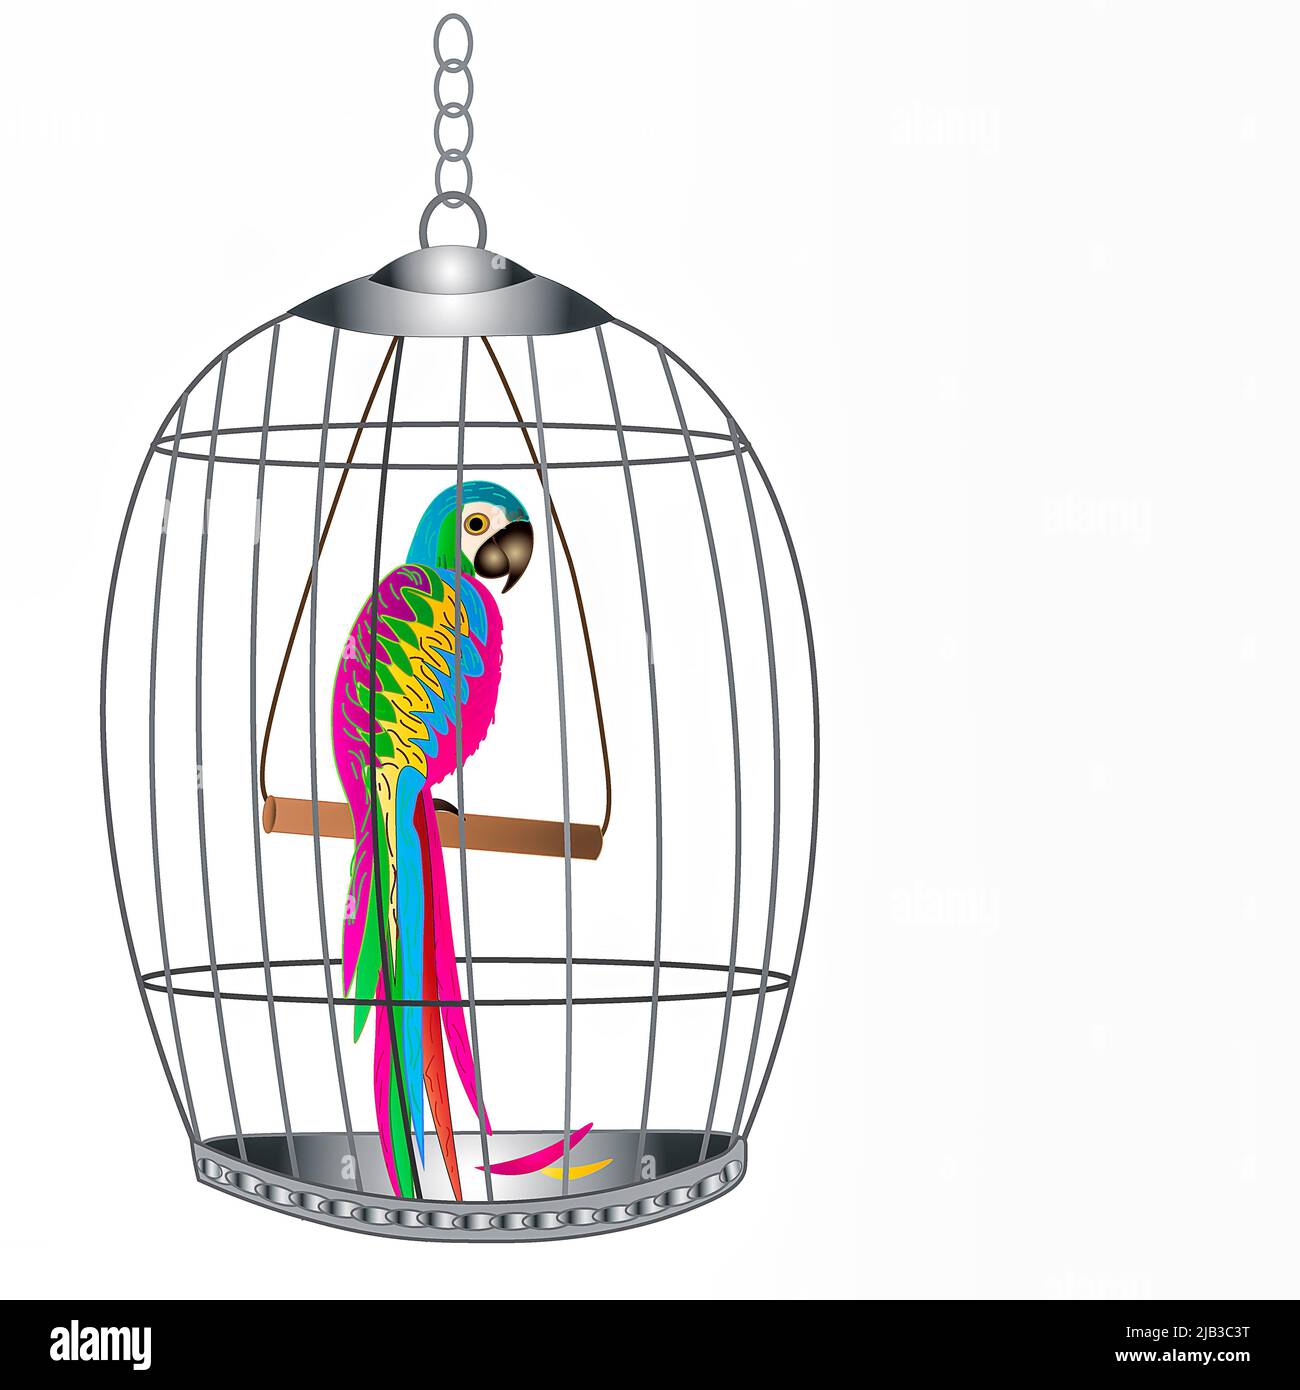 Large graphic bird-cage with tropical parrot inside Stock Photo